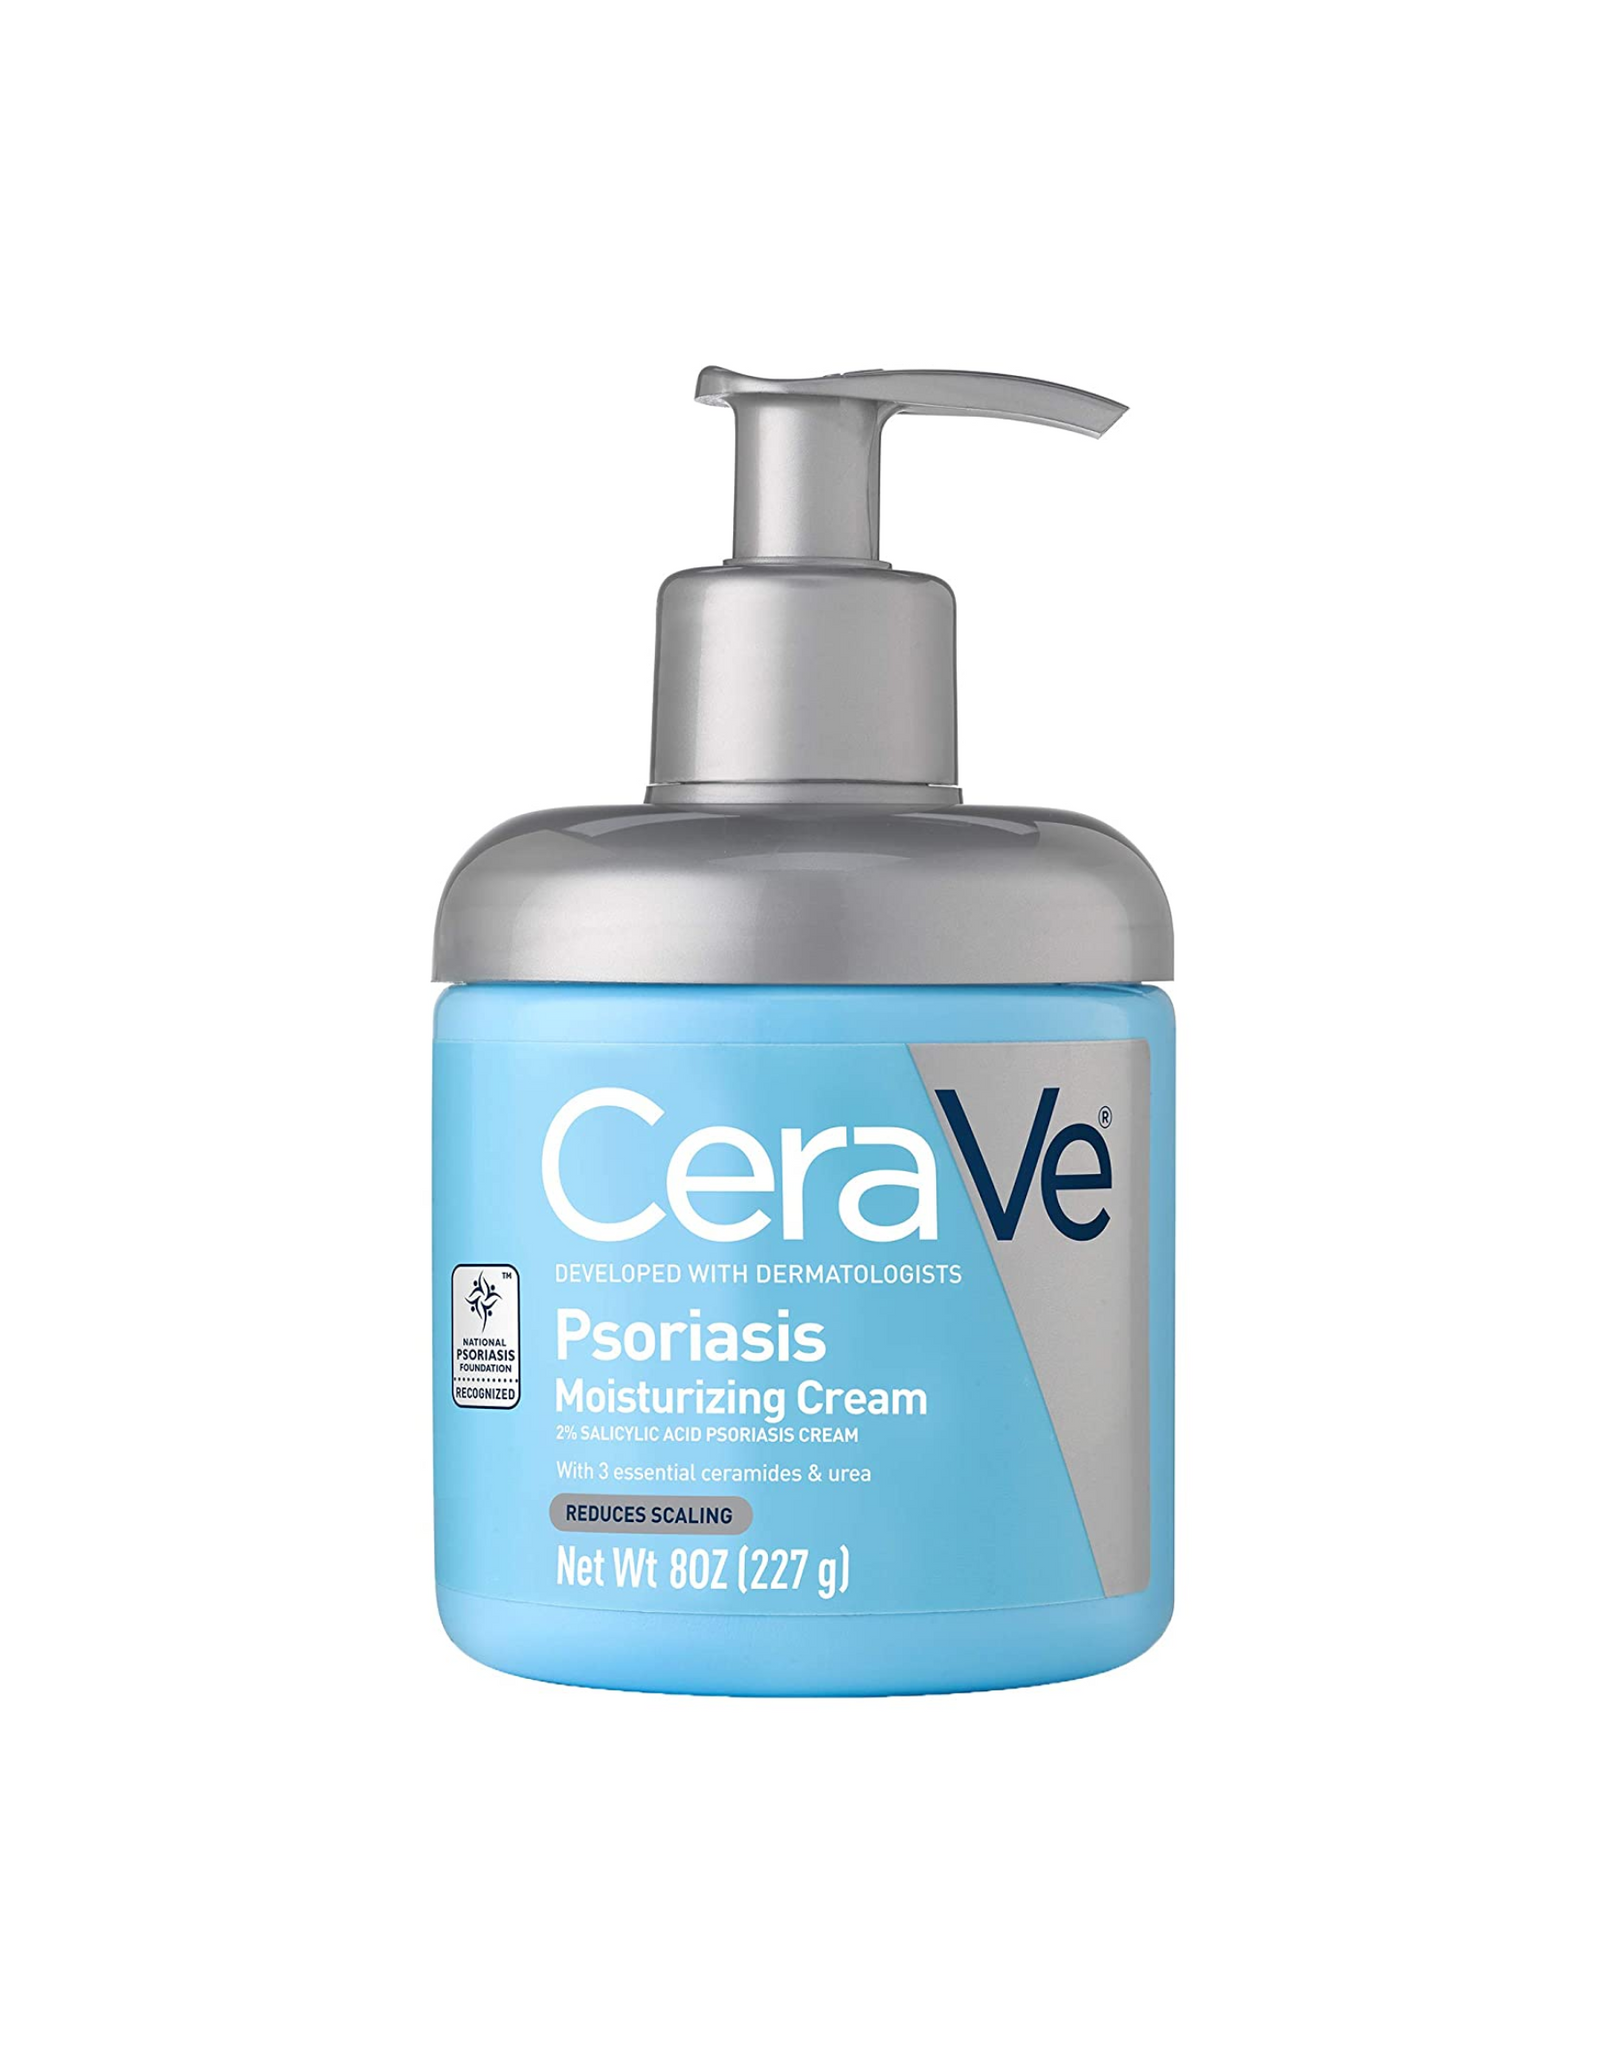 CeraVe Moisturizing Cream for Psoriasis Treatment With Salicylic Acid for Dry Skin Itch Relief & Urea for Moisturizing Fragrance Free & Allergy Tested 8 Oz